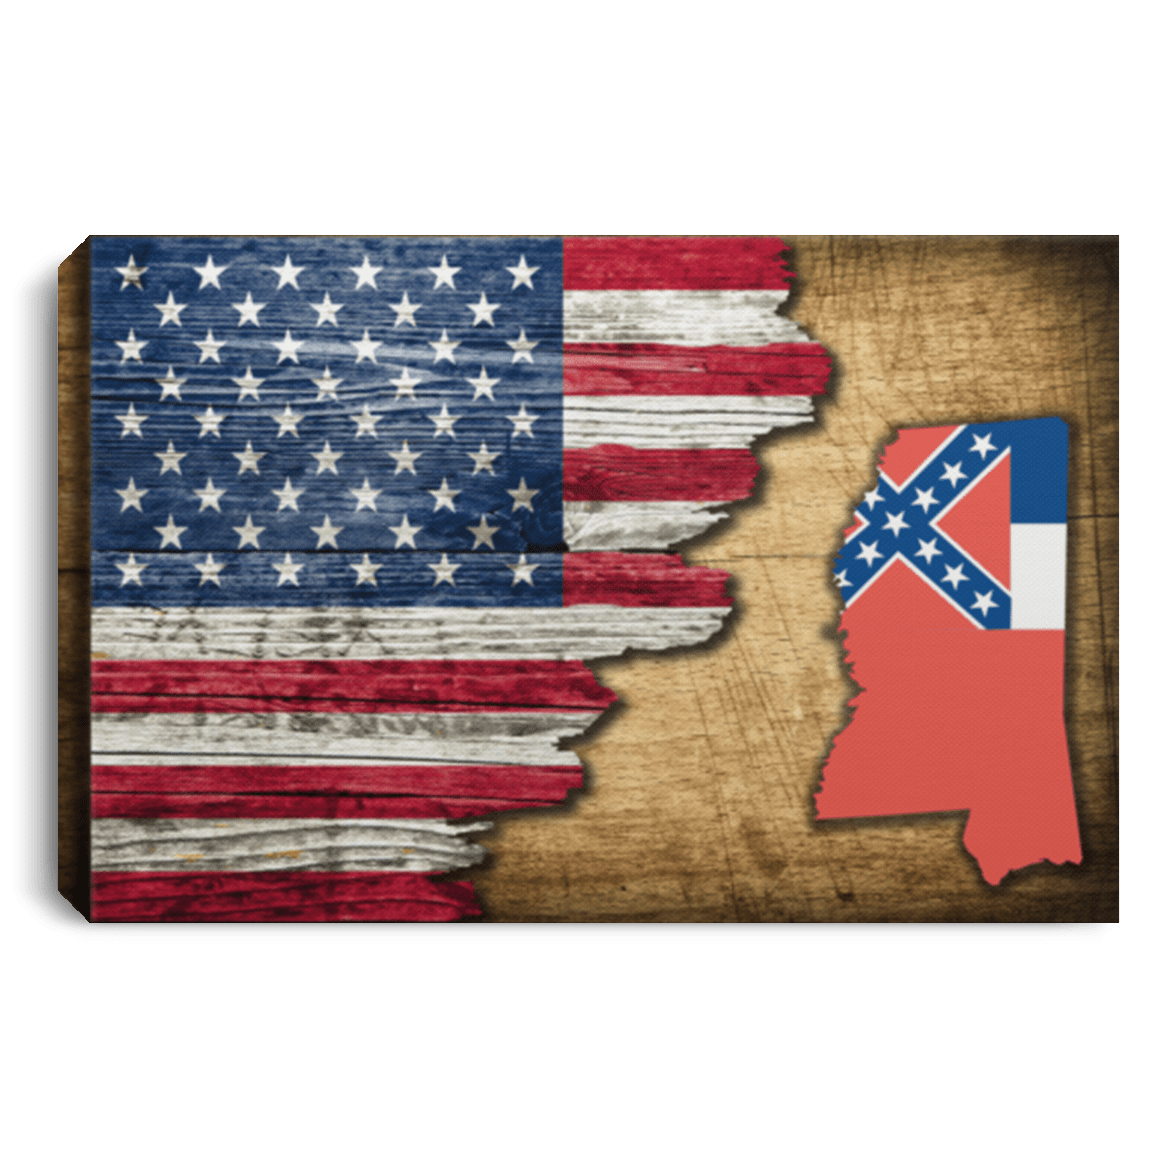 United States/Mississippi Flag Ripped Effect 12X8 Inches Landscape Canvas .75In Frame